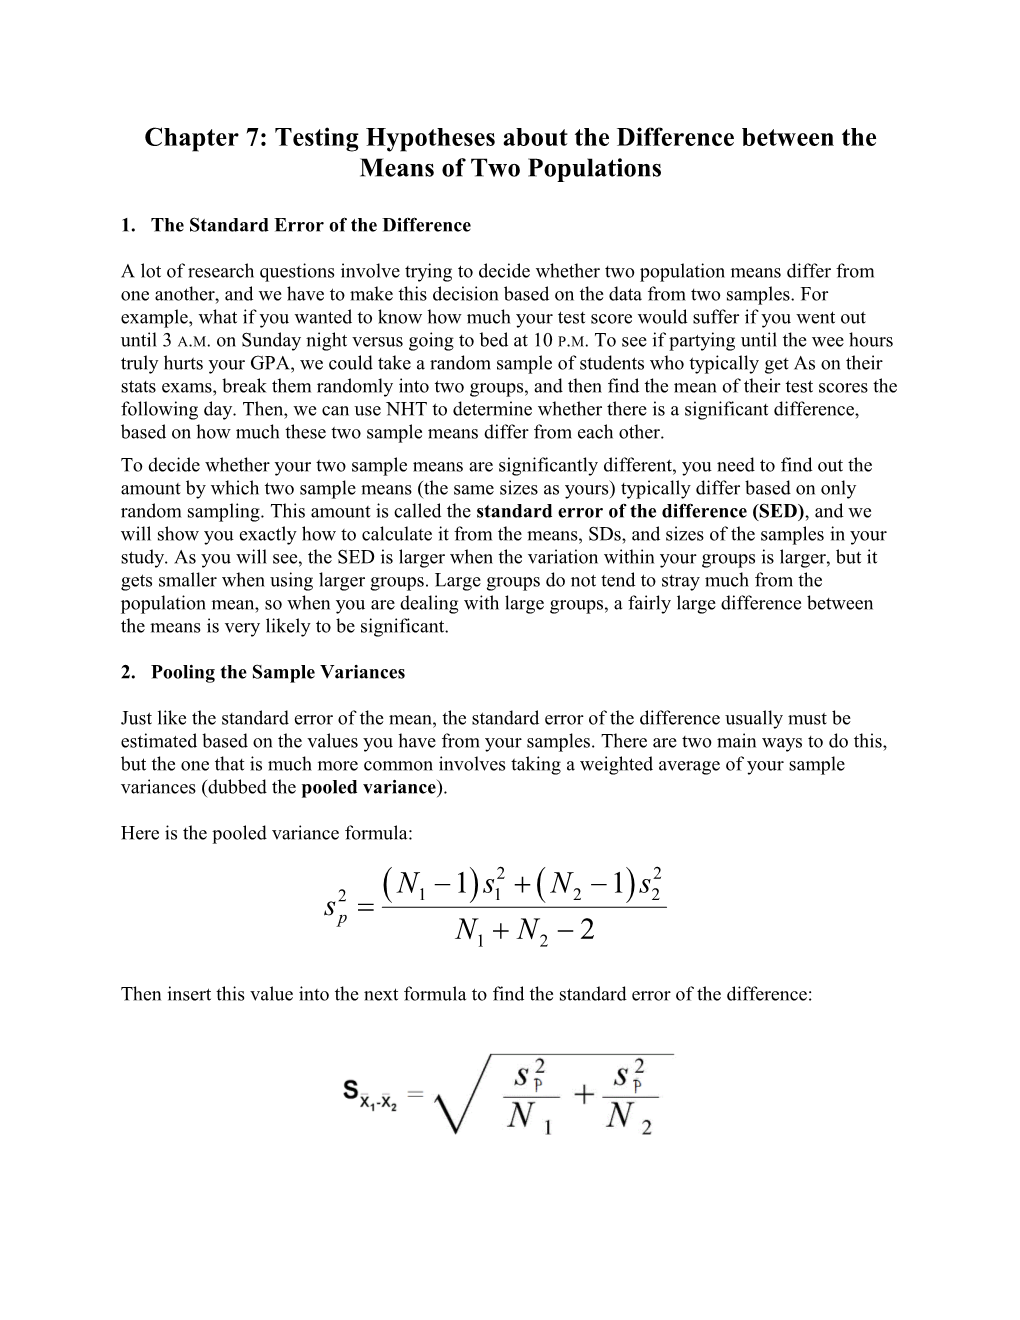 Chapter 8: Testing the Difference of the Means of Two Populations